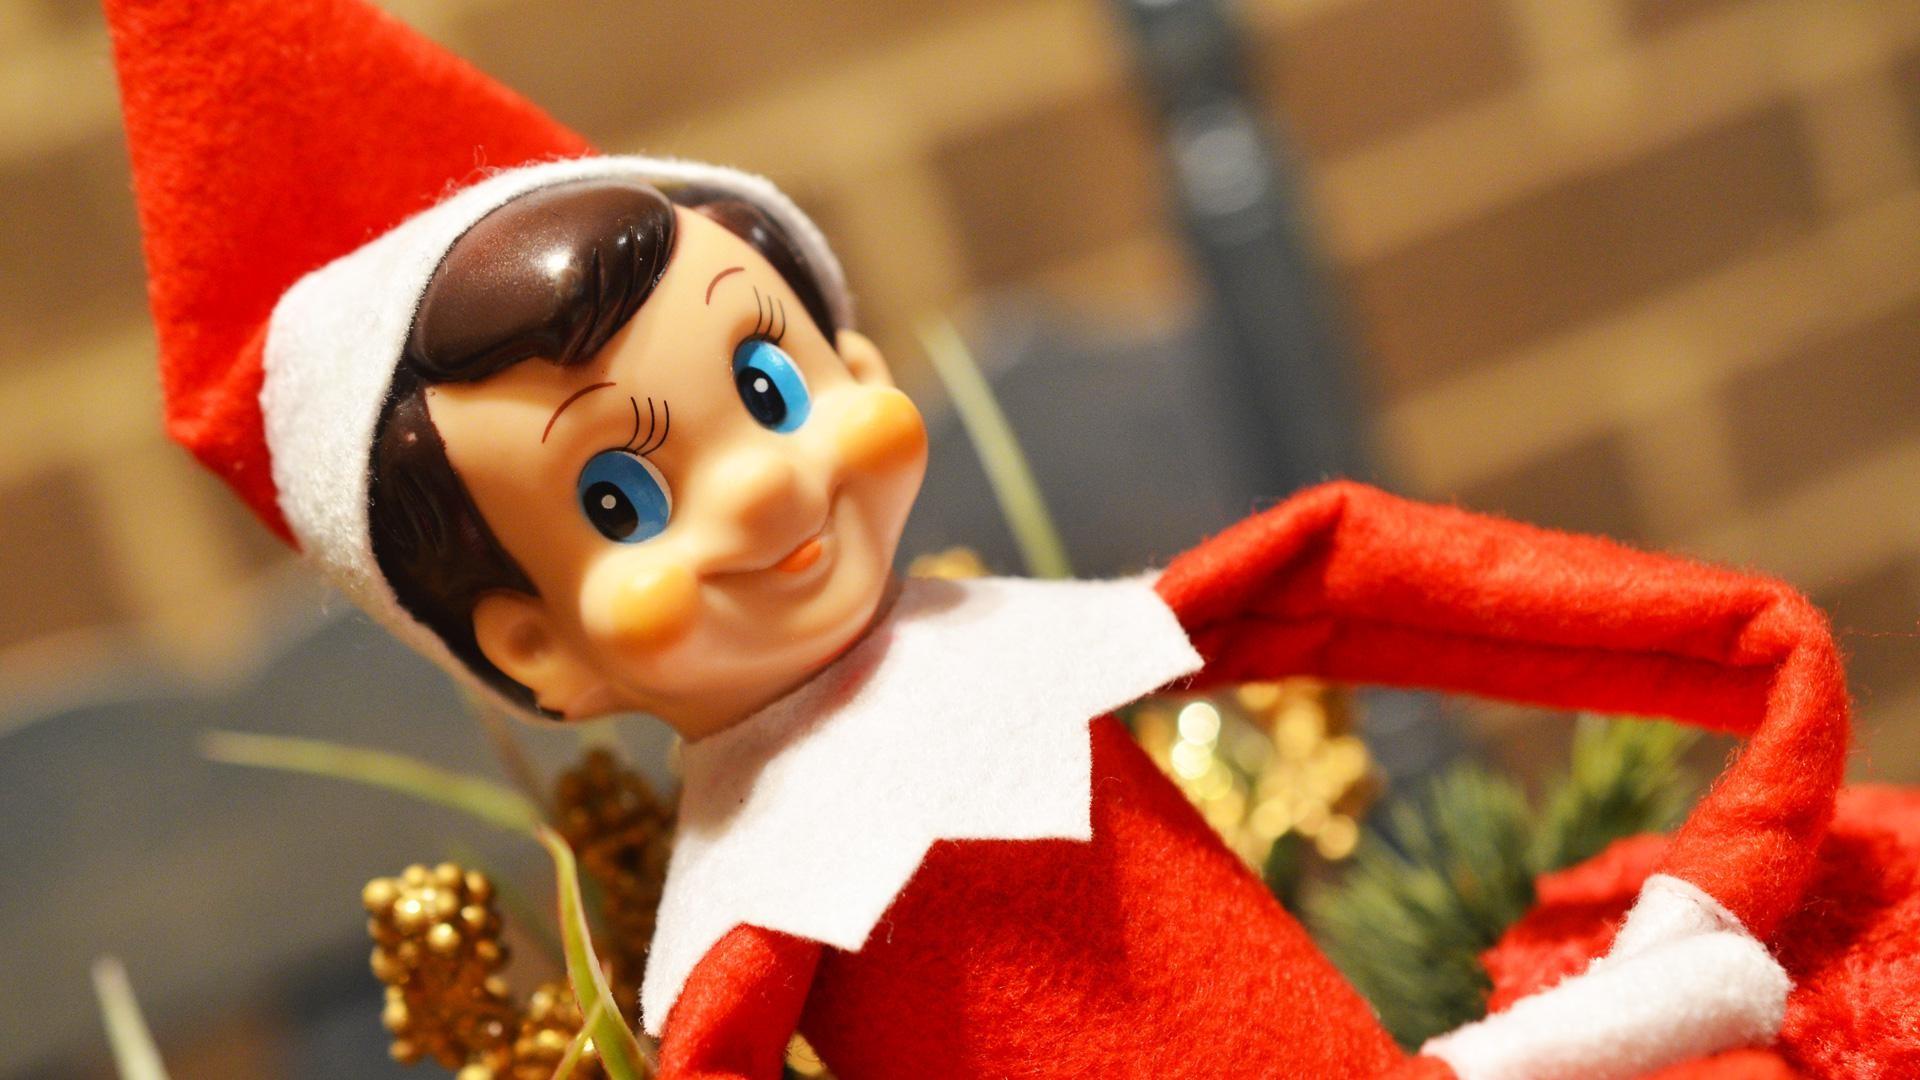 Elf On The Shelf Pictures  Download Free Images on Unsplash